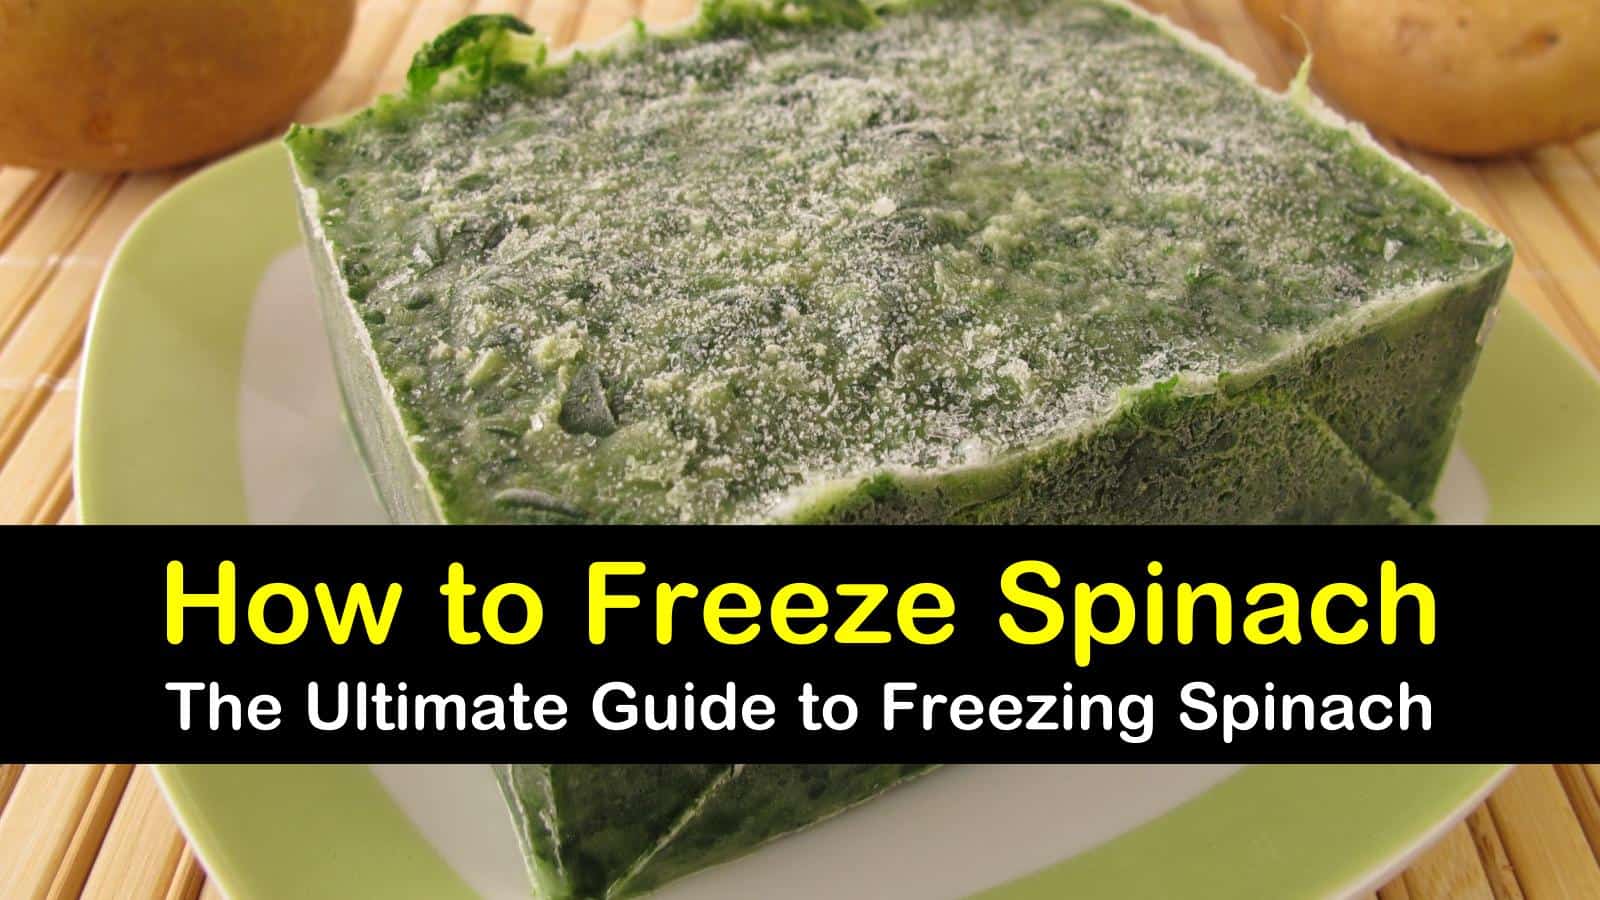 how to freeze spinach titleimg1